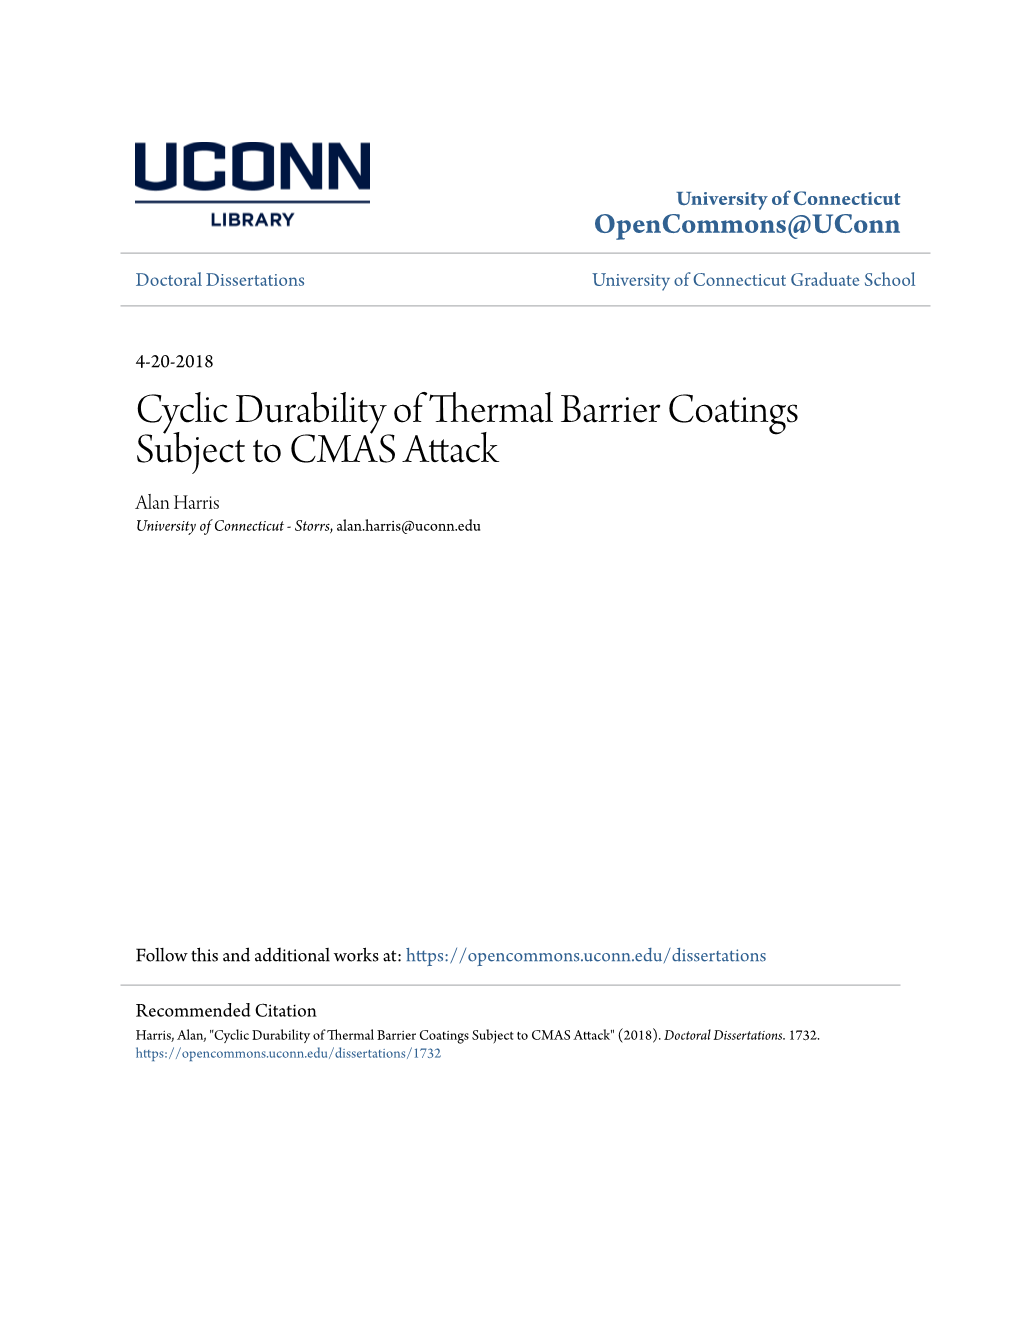 Cyclic Durability of Thermal Barrier Coatings Subject to CMAS Attack Alan Harris University of Connecticut - Storrs, Alan.Harris@Uconn.Edu